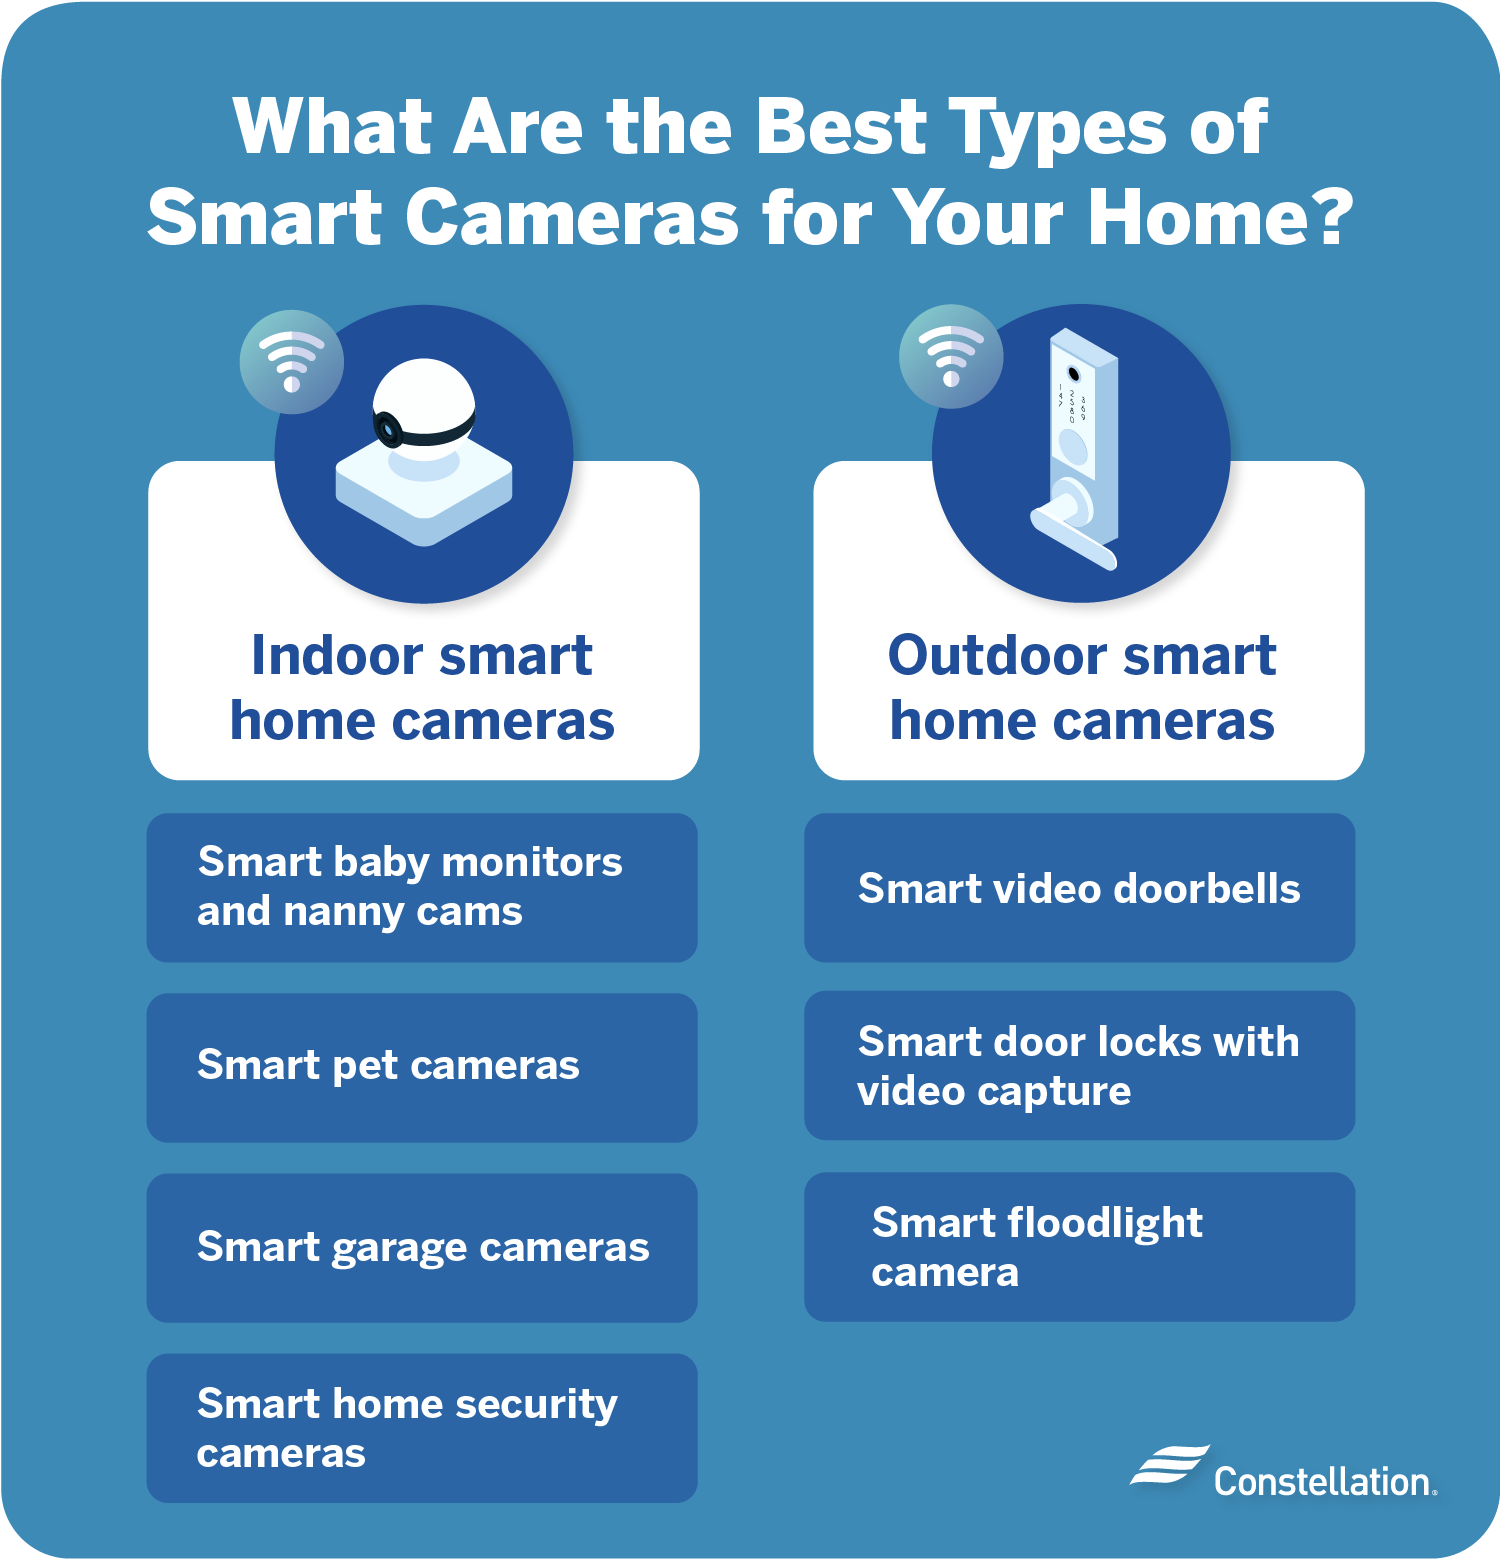 What are the best types of smart cameras for your home?